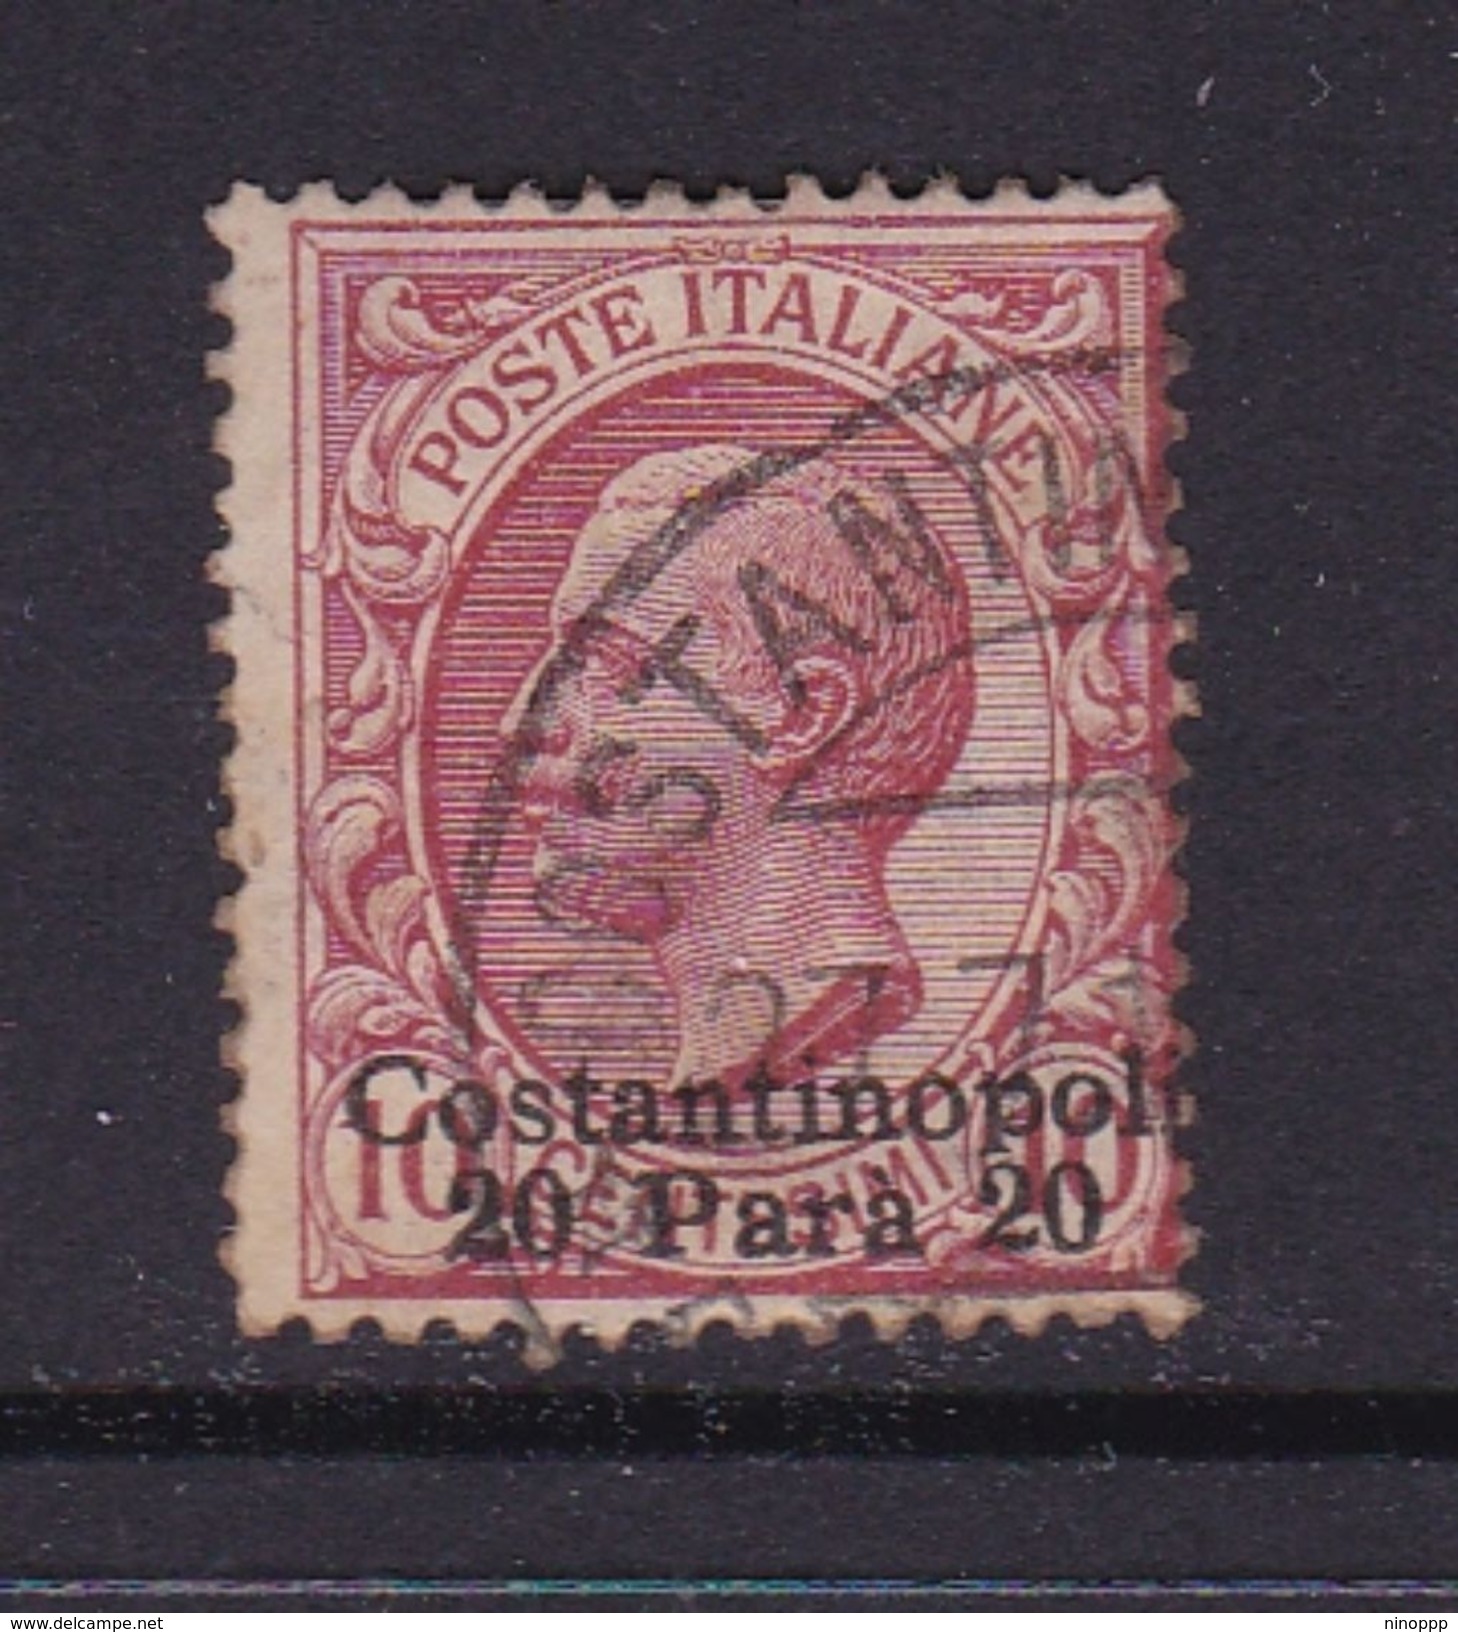 Italy-Italian Offices Abroad-European And Asia Offices-Constantinople S21 1909  20 Para On10 C Rose Used - European And Asian Offices